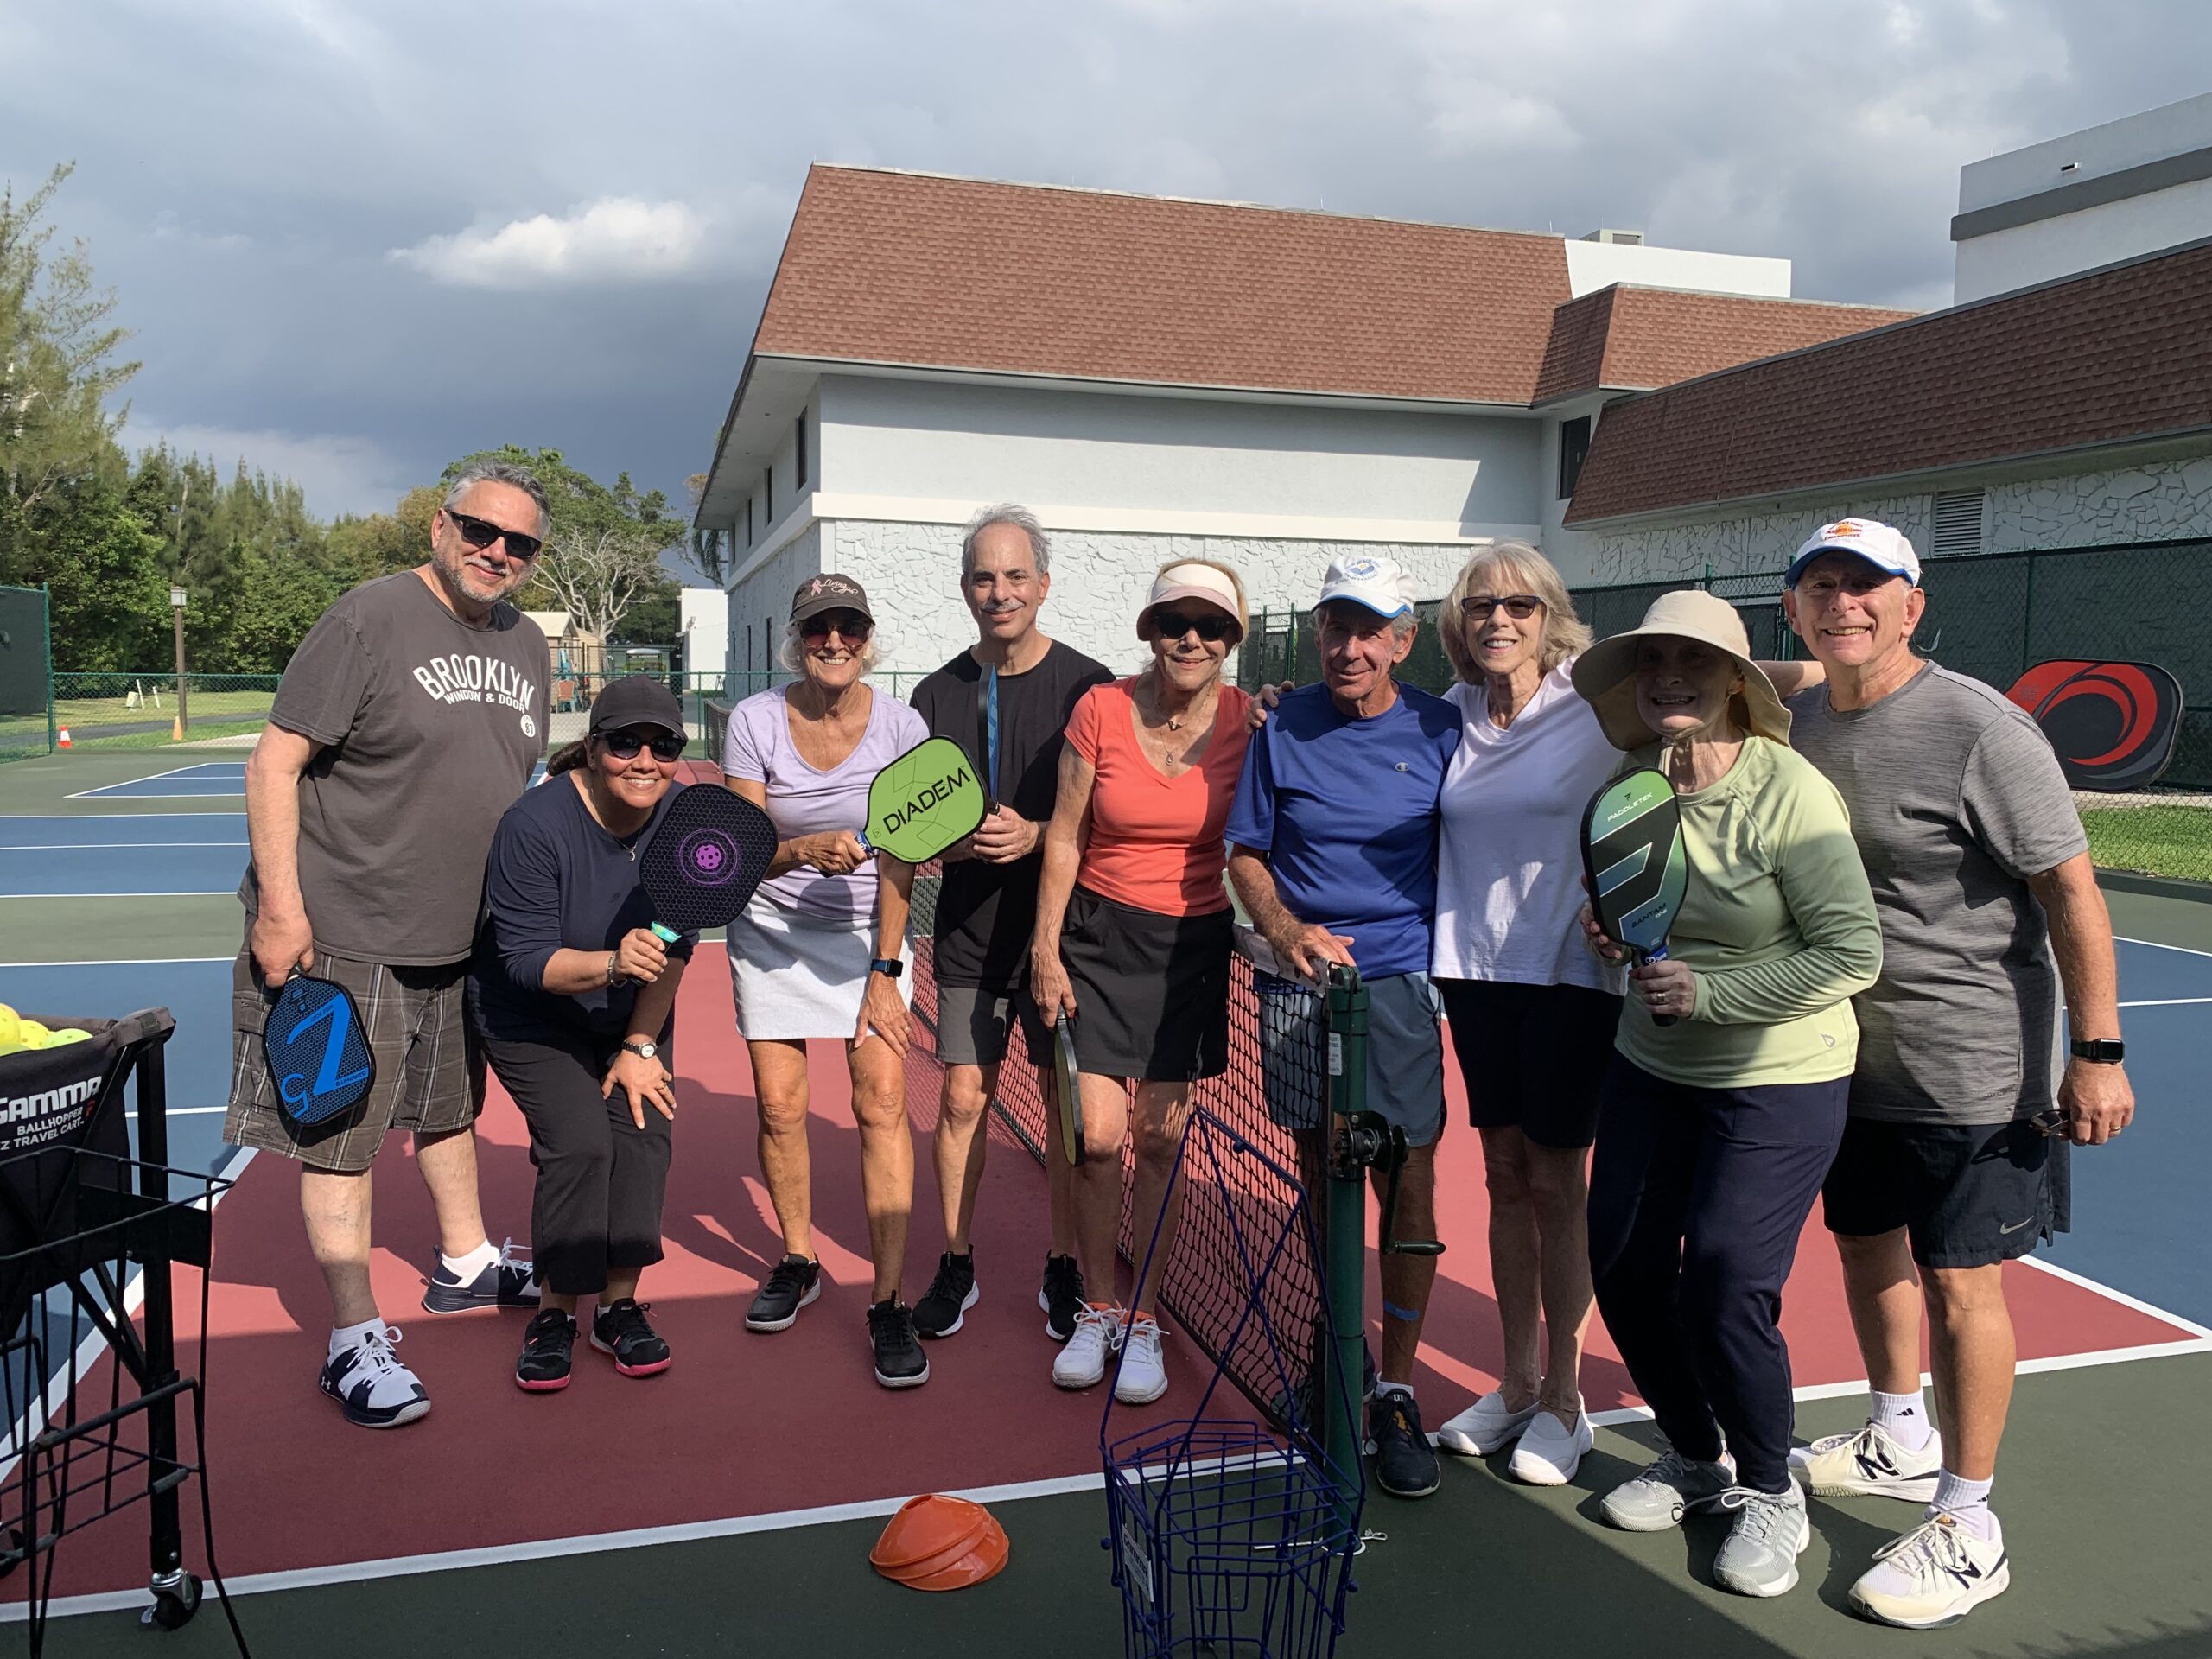 Bob teaching pickleball to a group of newbies at Huntington Lakes in Delray Beach, FL